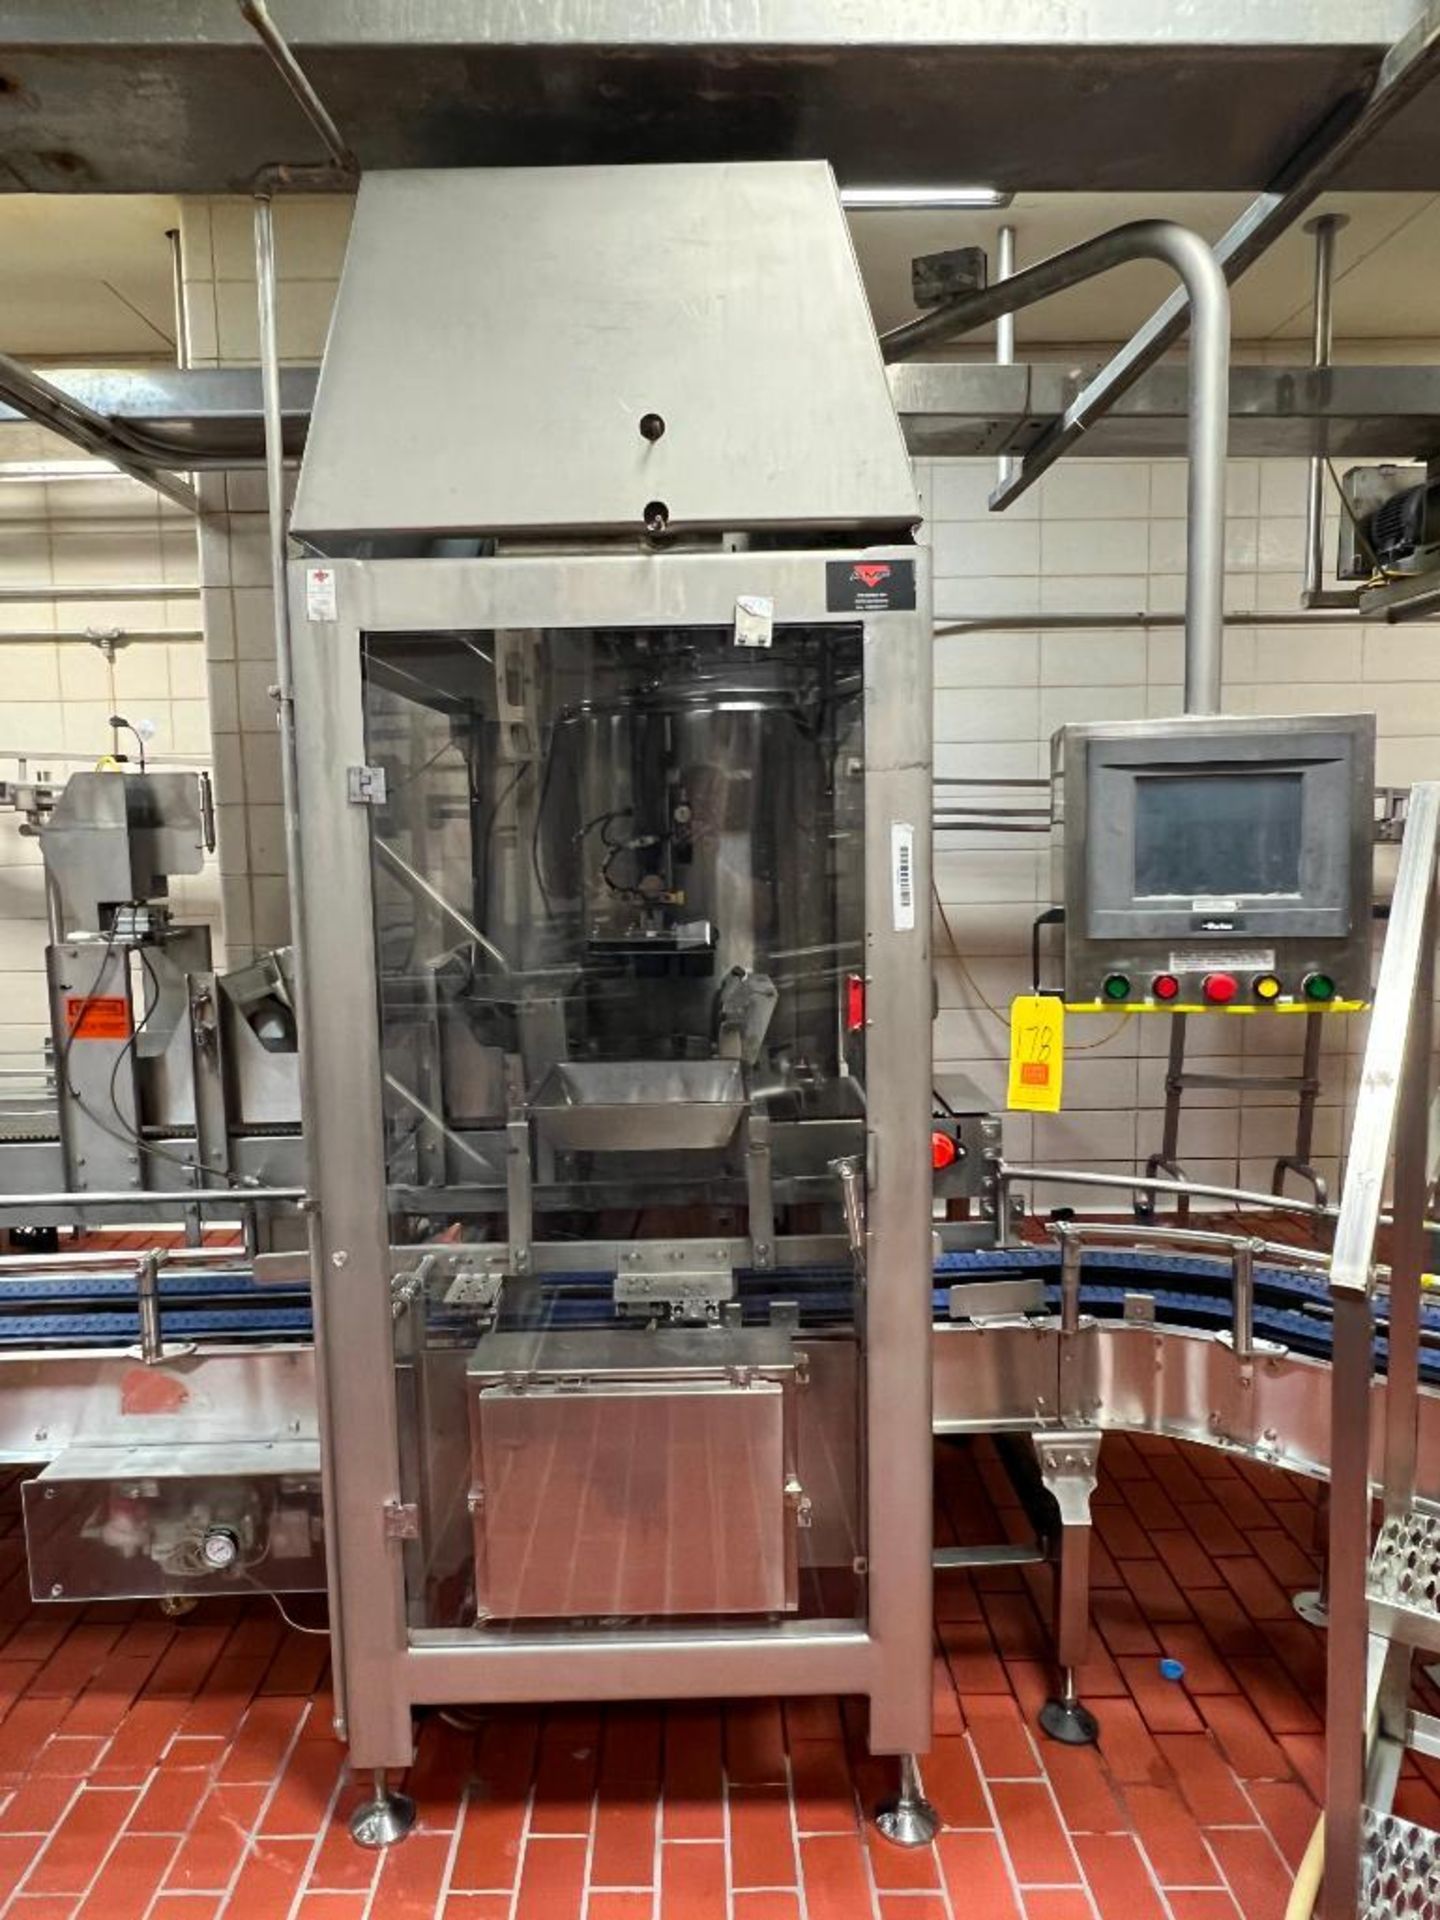 AMF Caser, Model: VERSAPAK, S/N: 2005001 with Parker Touch Screen HMI - Rigging Fees: $1200